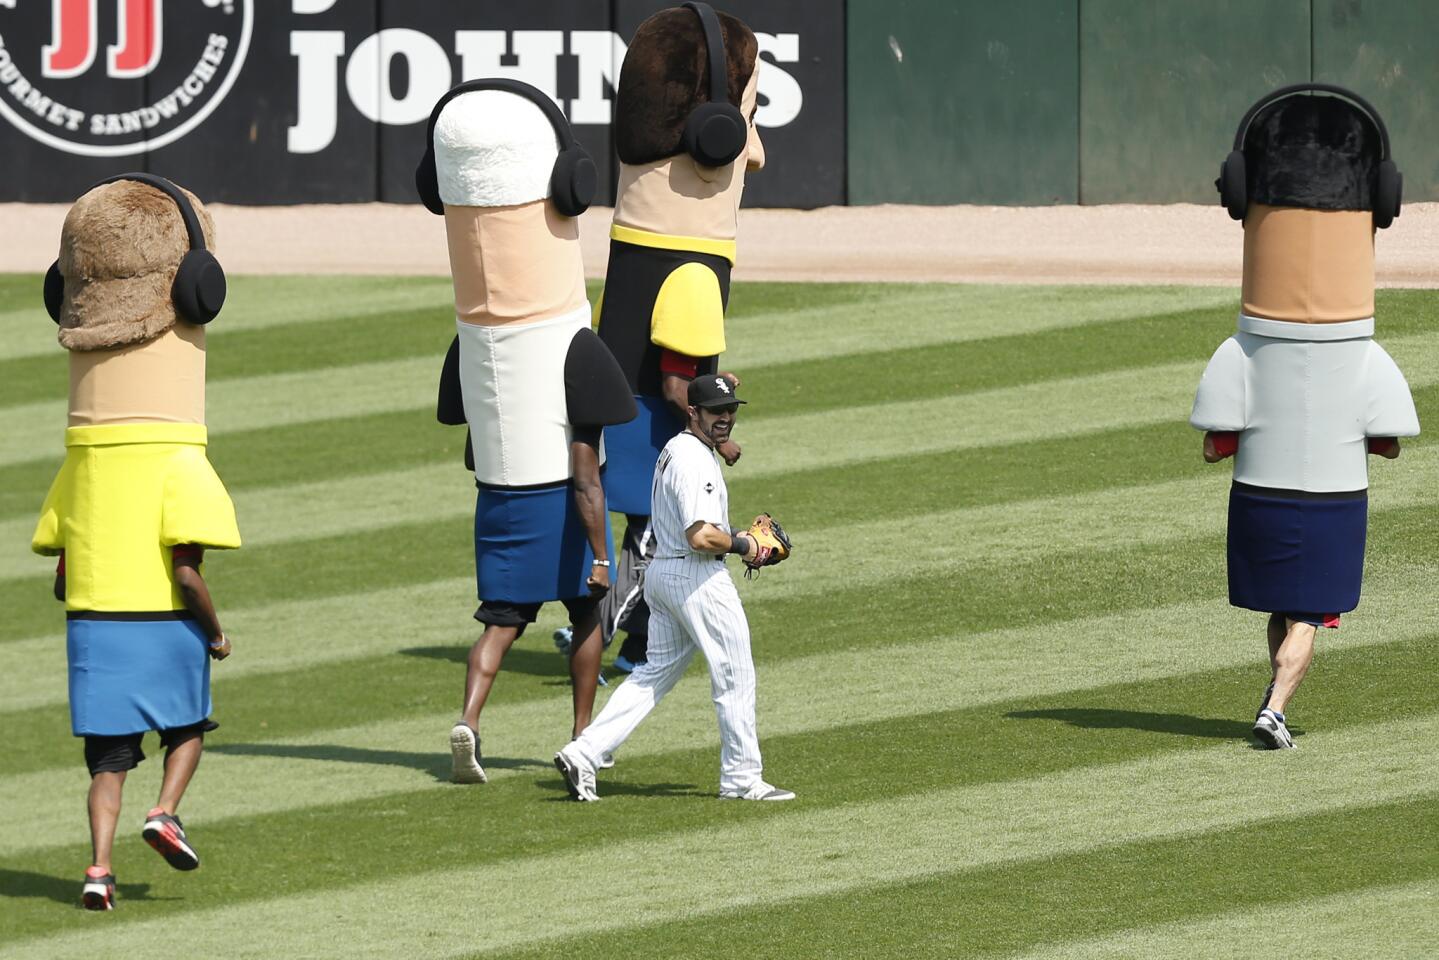 White Sox center fielder Adam Eaton runs to his position as a seventh inning as broadcaster mascots give chase.